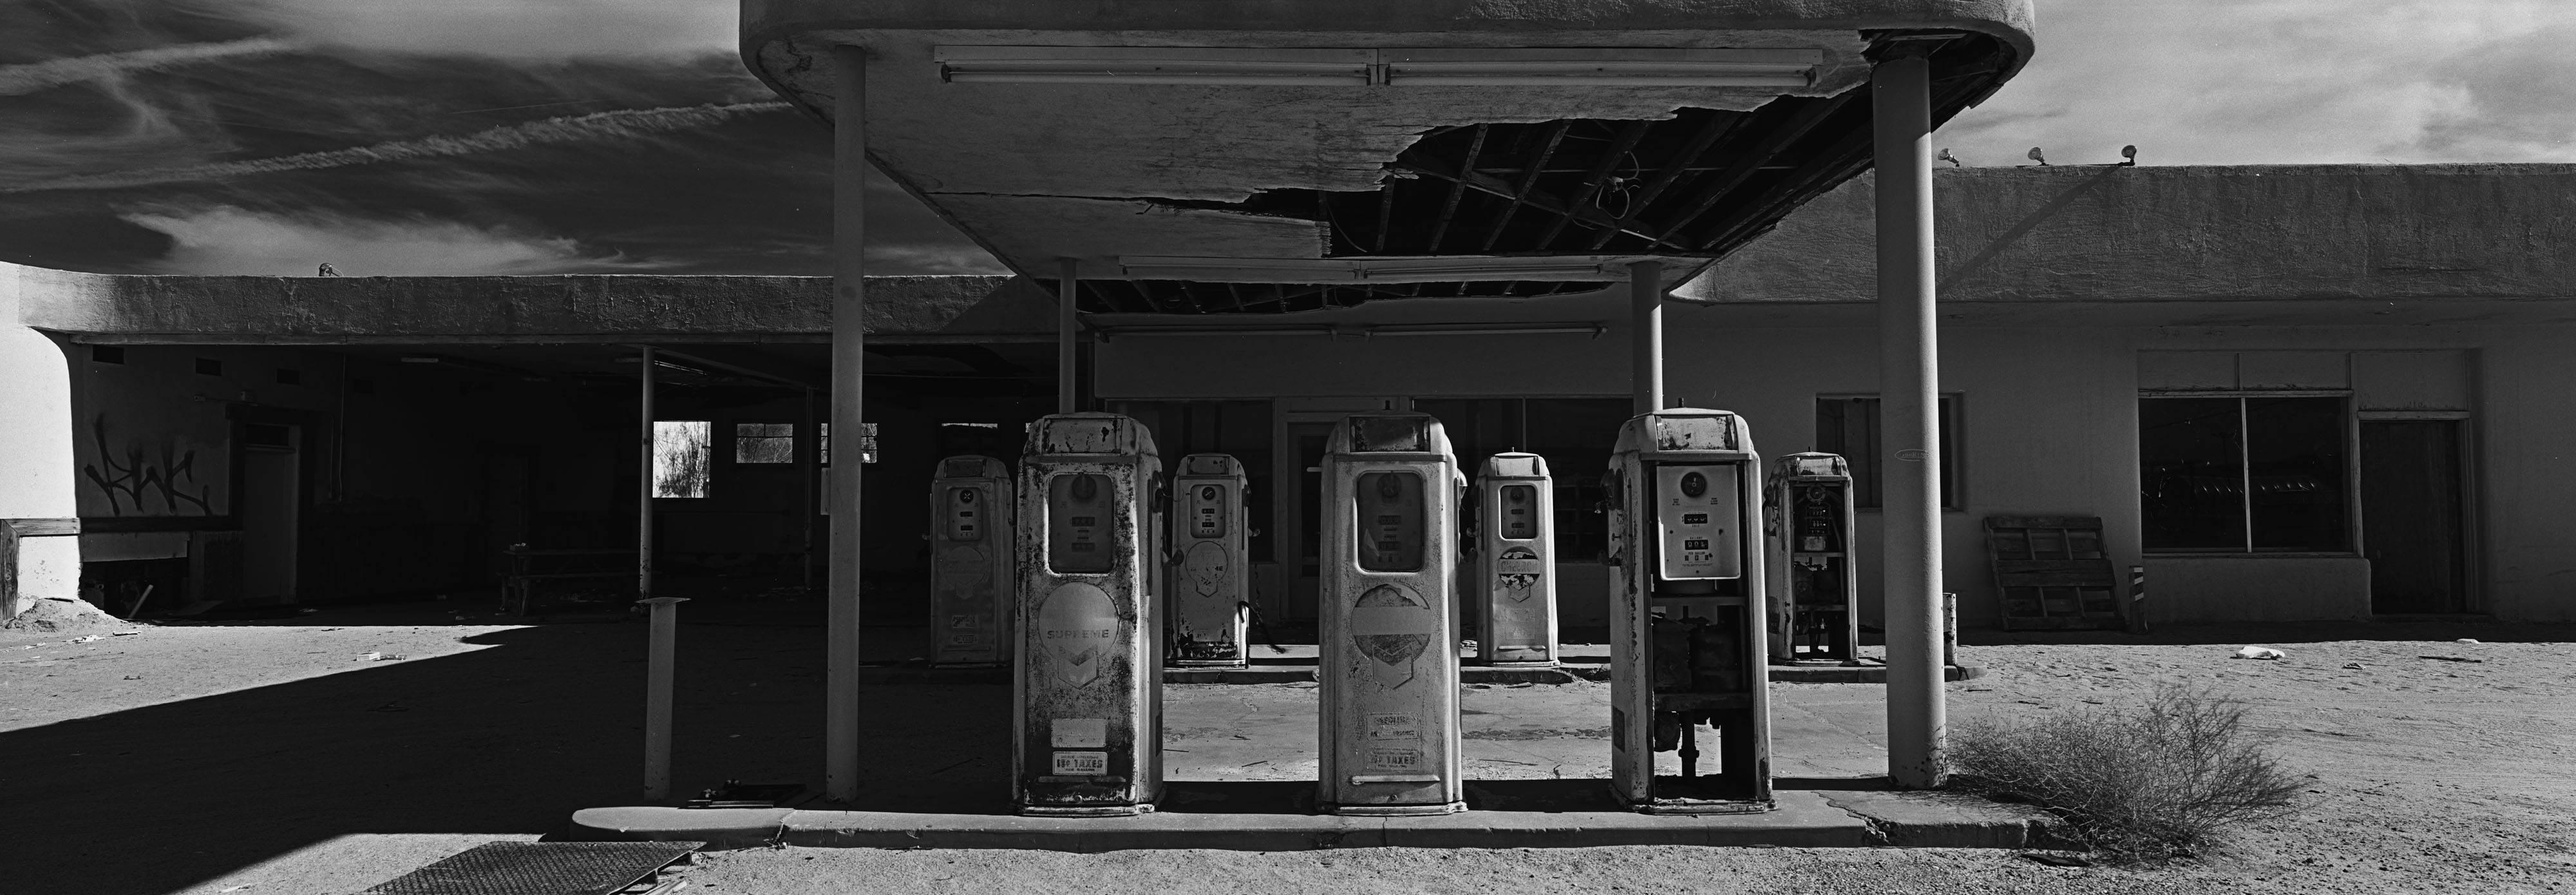 Landscape Photography Panoramic Series: 'Gas Pumps'